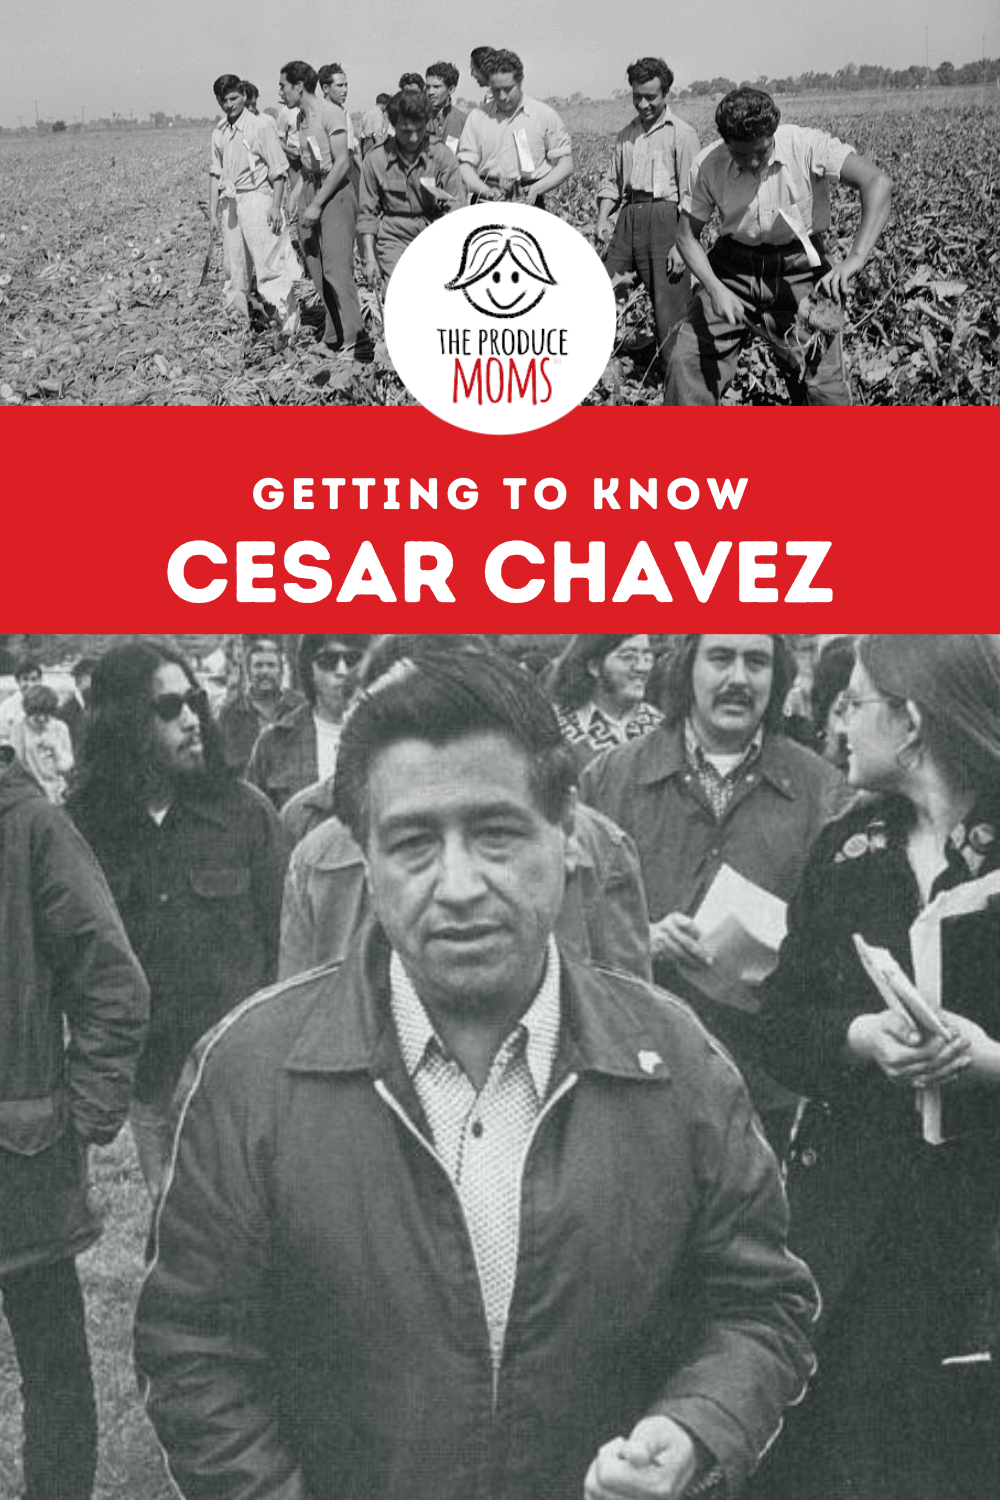 Pinterest Pin Getting To Know Cesar Chavez